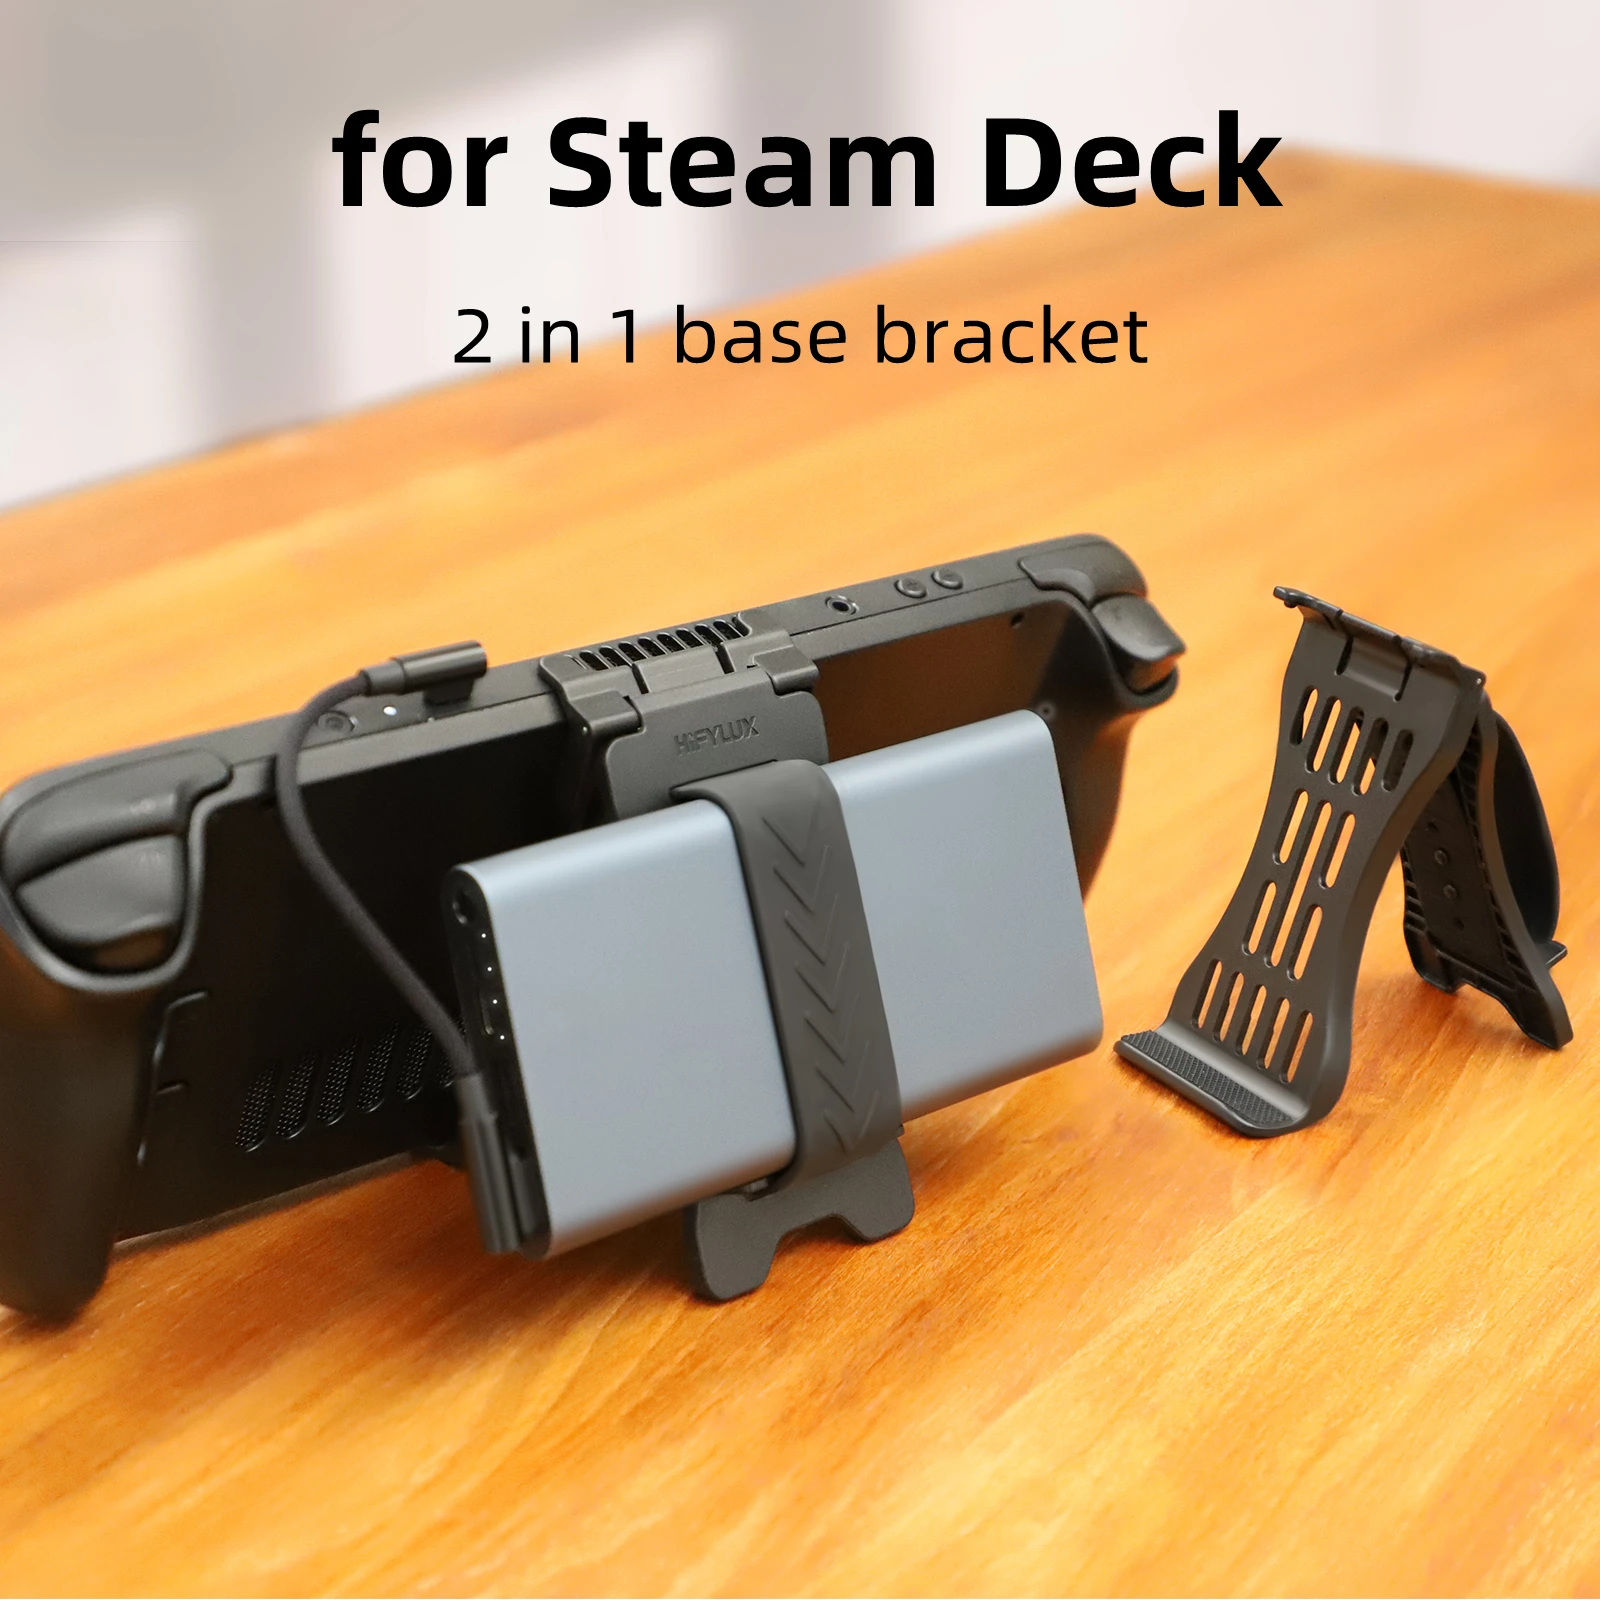 

For Steam Deck Bracket Stand Game Console Base Charging Treasure Base Mobile Power Desktop Stand For Steam Deck Accessories